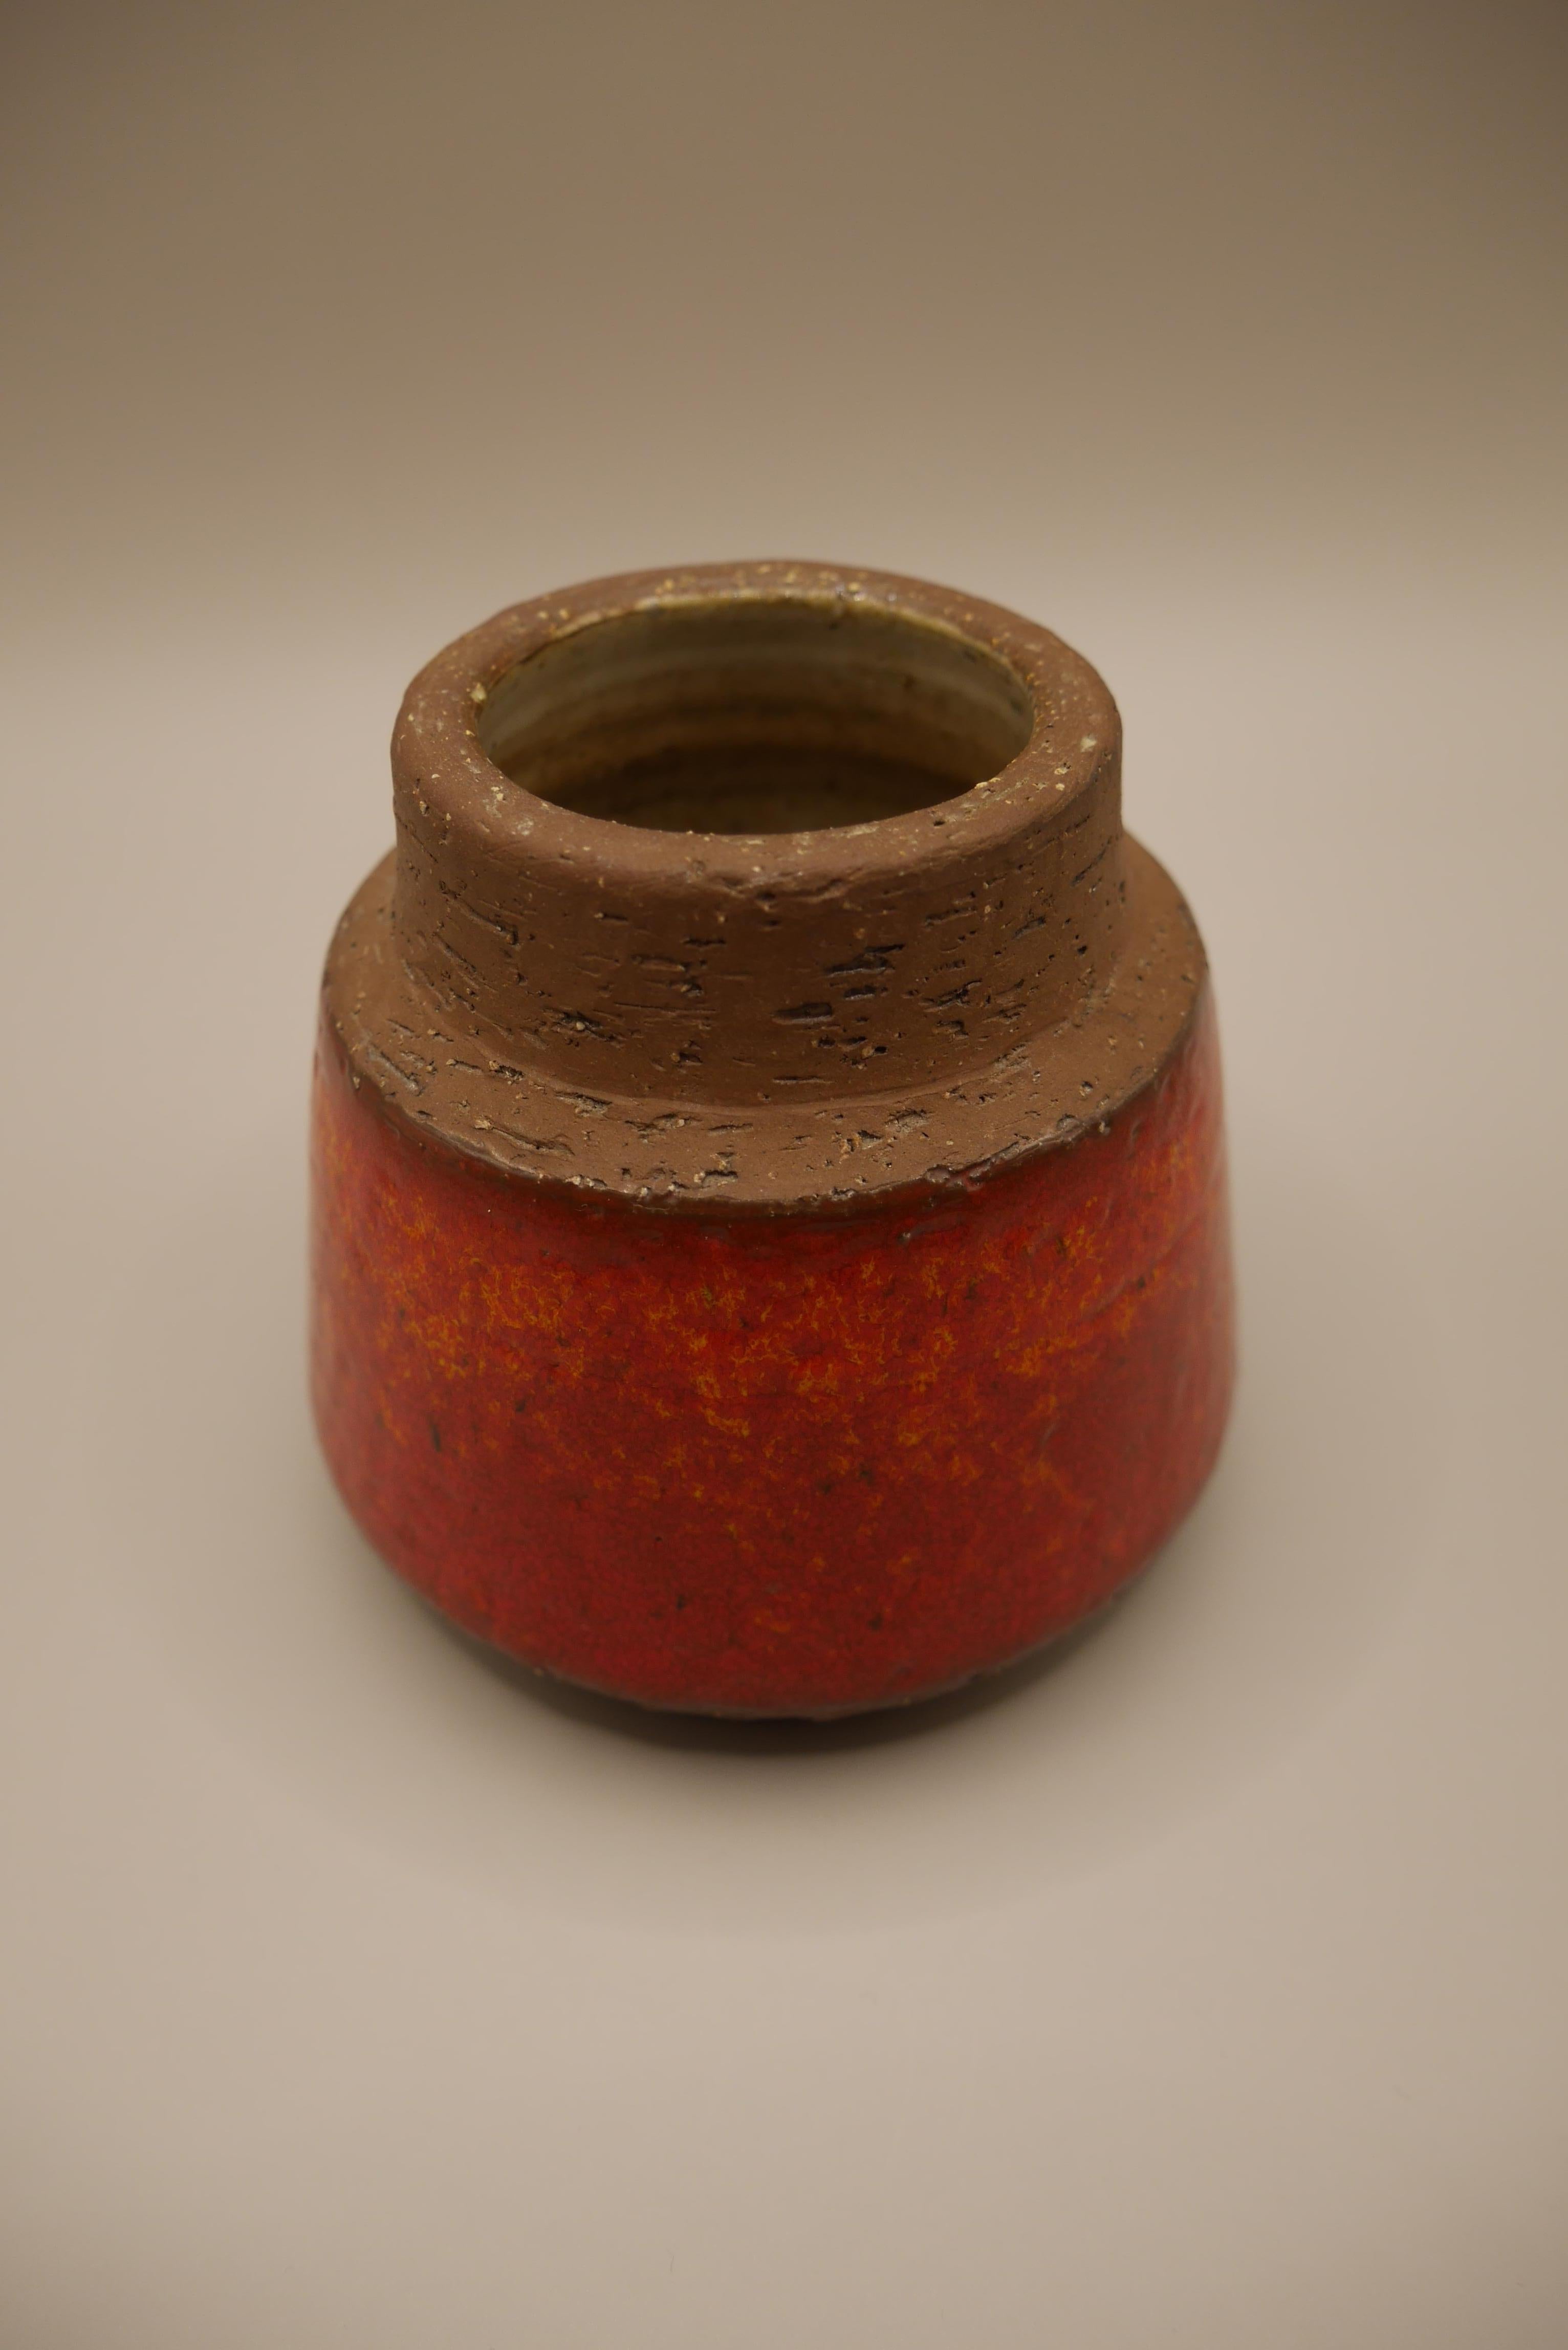 A small vase or pot by Micheal Andersen for Bornholm ceramics in Denmark. Heavy, rough clay with a red/orange glaze around the body of the piece. This vase is part of a series in the same style which featured many variations of the same form with